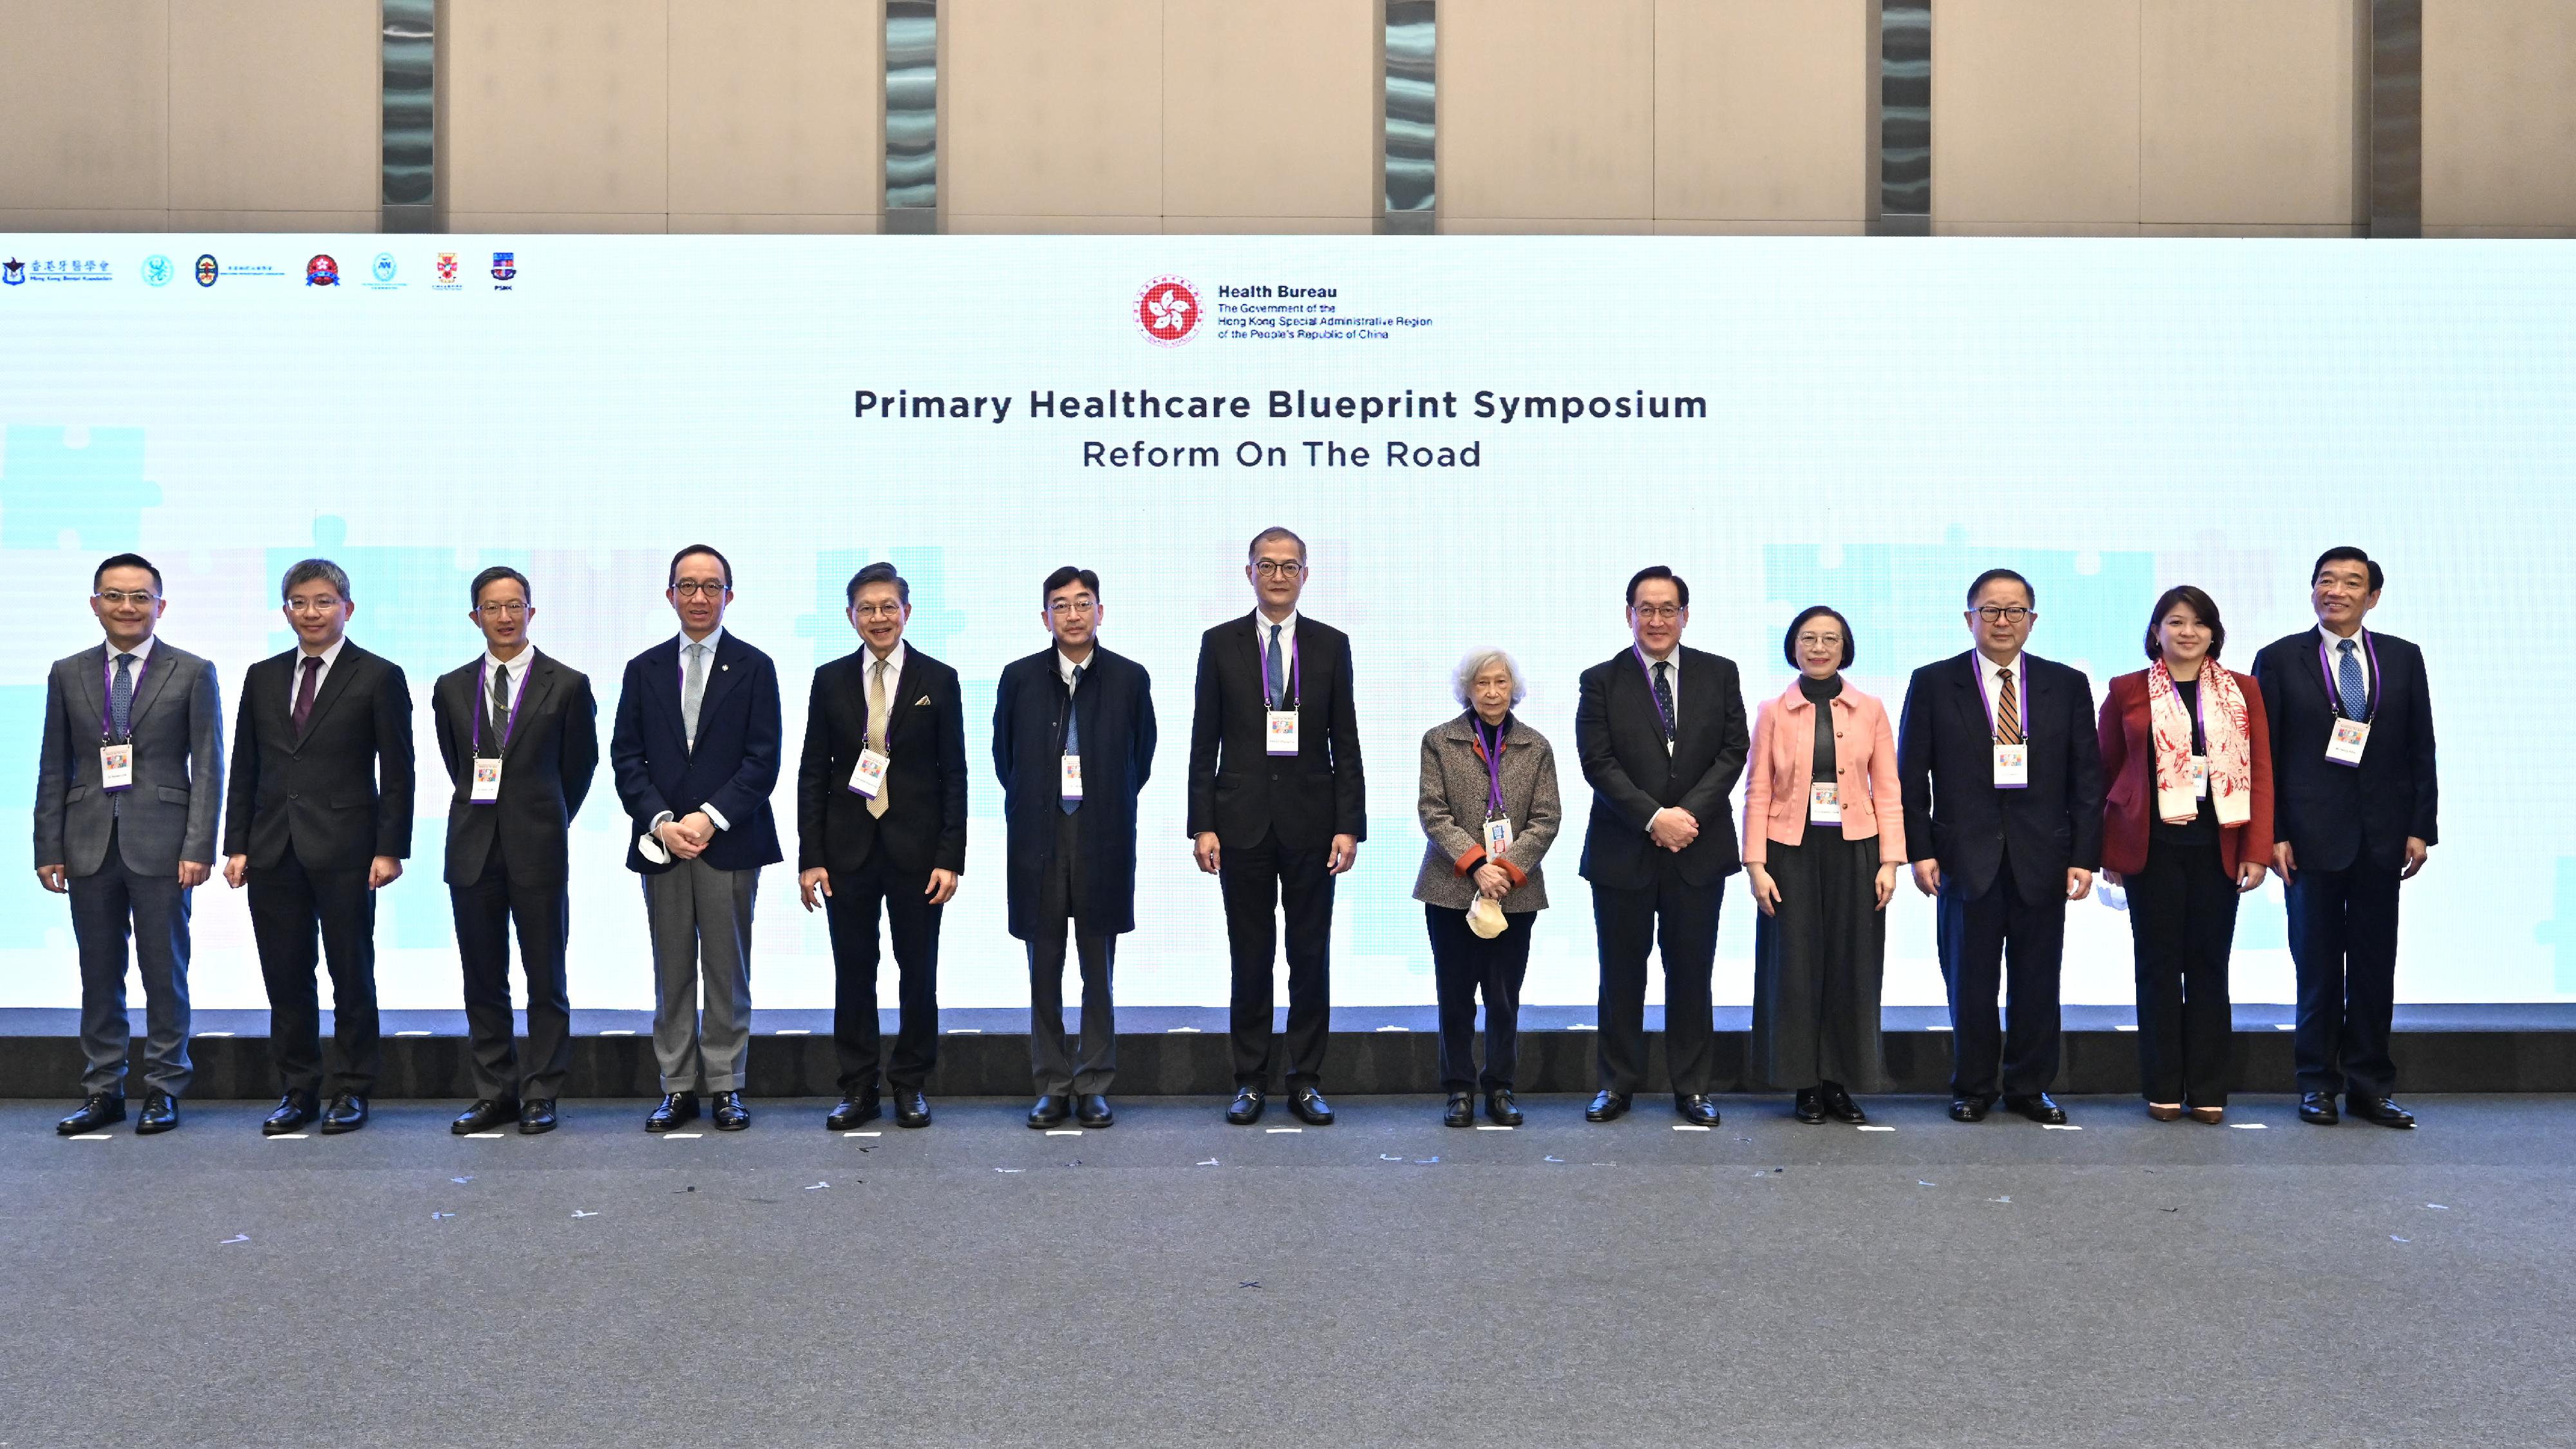 The Secretary for Health, Professor Lo Chung-mau (centre), the Permanent Secretary for Health, Mr Thomas Chan (second left), and the Under Secretary for Health, Dr Libby Lee (second right), join a group photo with guests at the Primary Healthcare Blueprint Symposium today (January 15). The guests are Honorary University Fellow of the University of Hong Kong, Professor Rosie Young (sixth right); Non-official Member of the Executive Council and former Secretary for Food and Health (SFH), Dr Ko Wing-man (sixth left); former SFHs, Dr Yeoh Eng-kiong (fifth left); Dr York Chow (fifth right); and Professor Sophia Chan (fourth right); Legislative Council Member, Dr David Lam (third left); Convenors of the Steering Committee on Primary Healthcare Development, Professor Gabriel Leung (fourth left) and Dr Donald Li (third right); the Director of Health, Dr Ronald Lam (first left); and the Chairman of the Hospital Authority, Mr Henry Fan (first right).